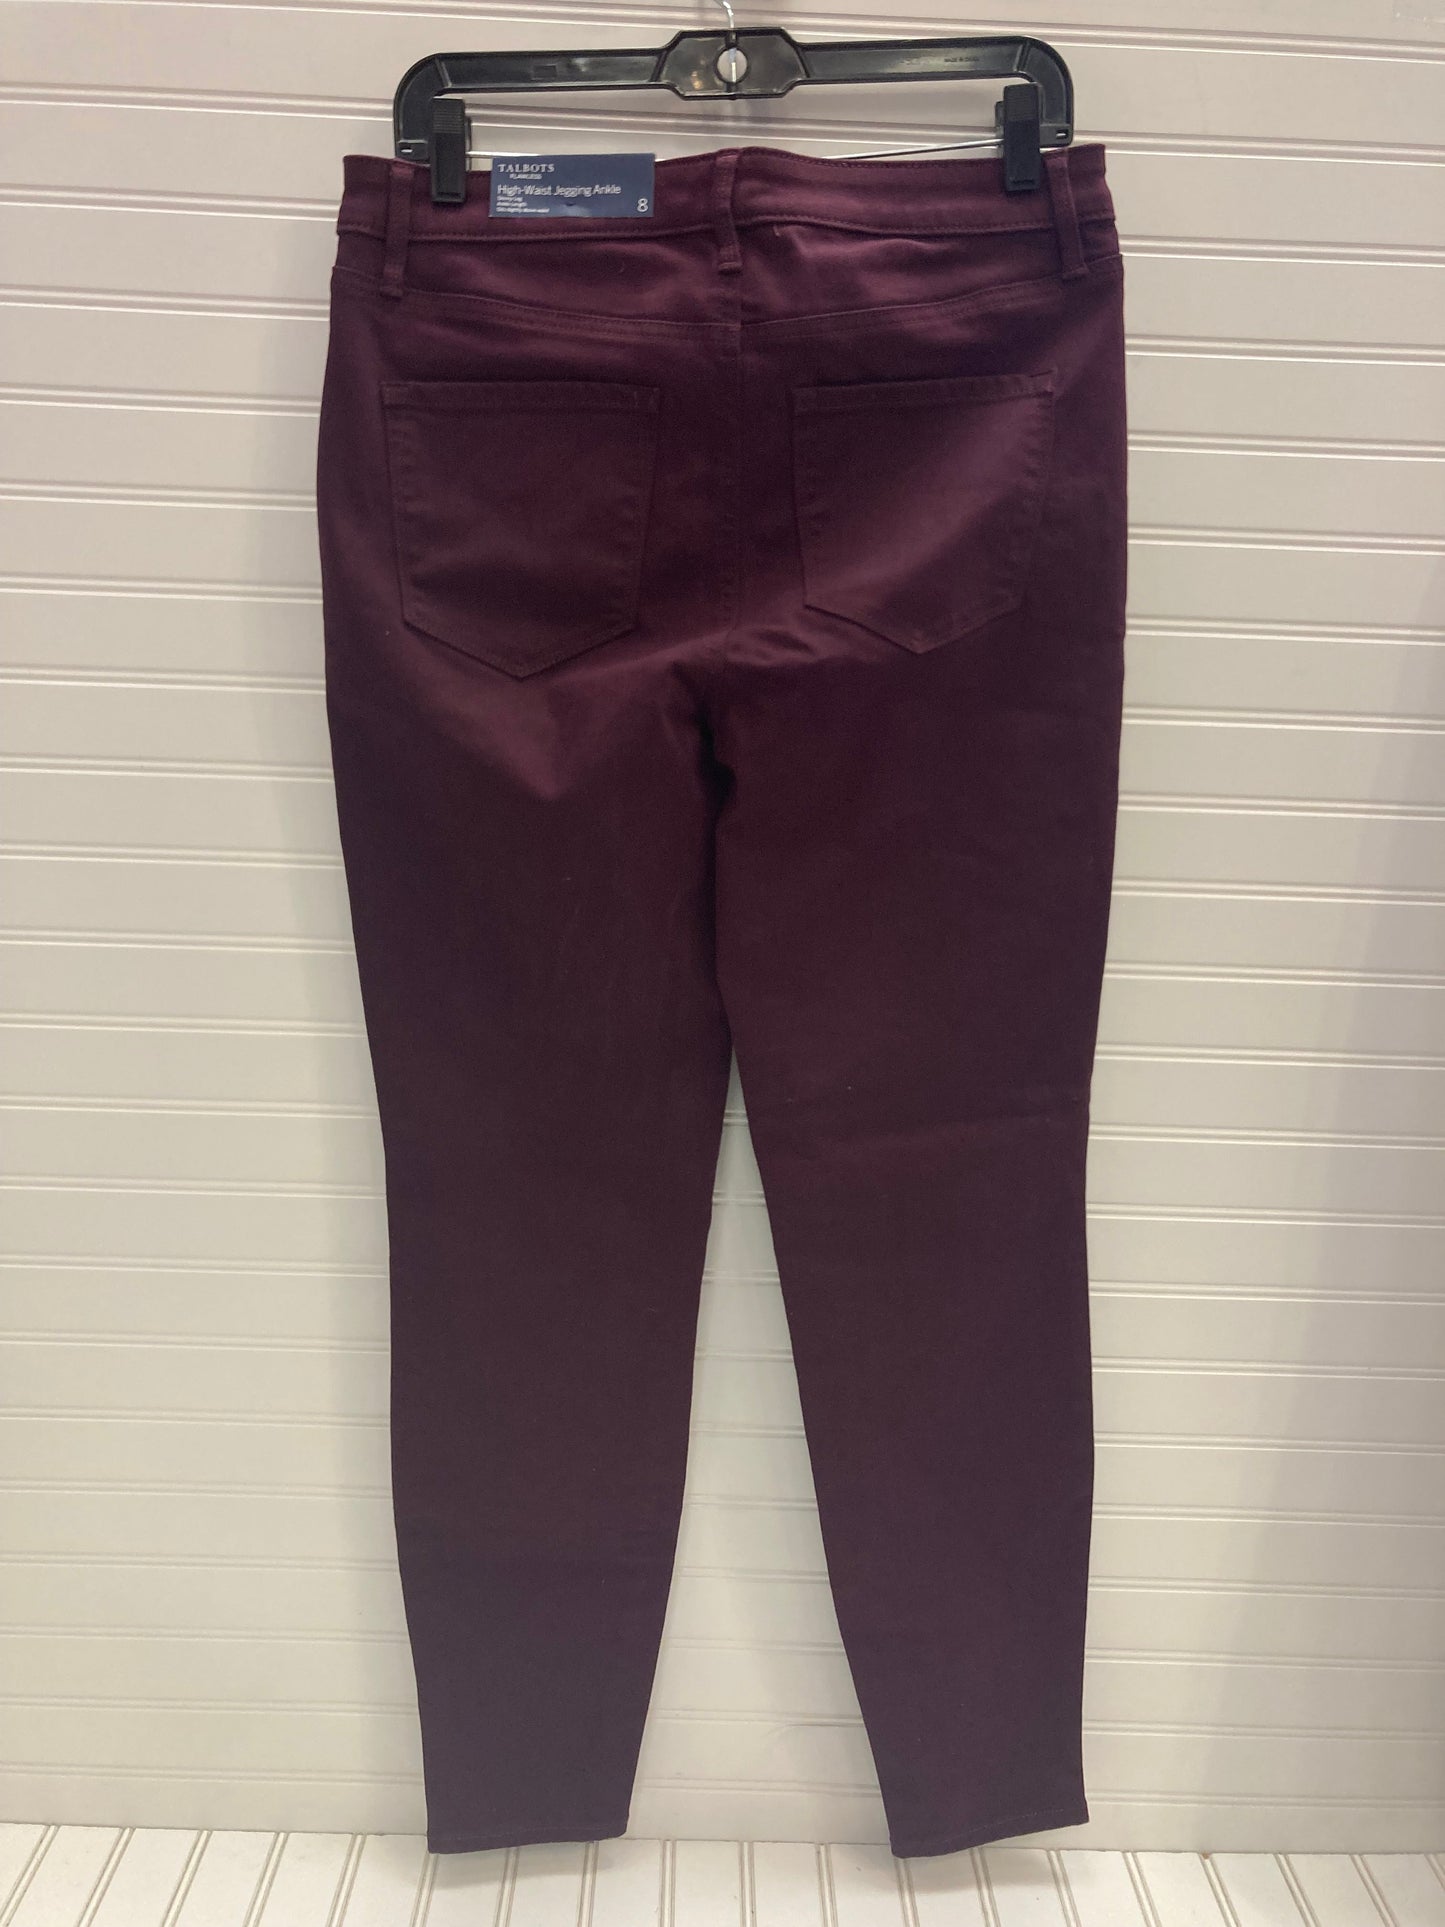 Jeans Jeggings By Talbots  Size: 8